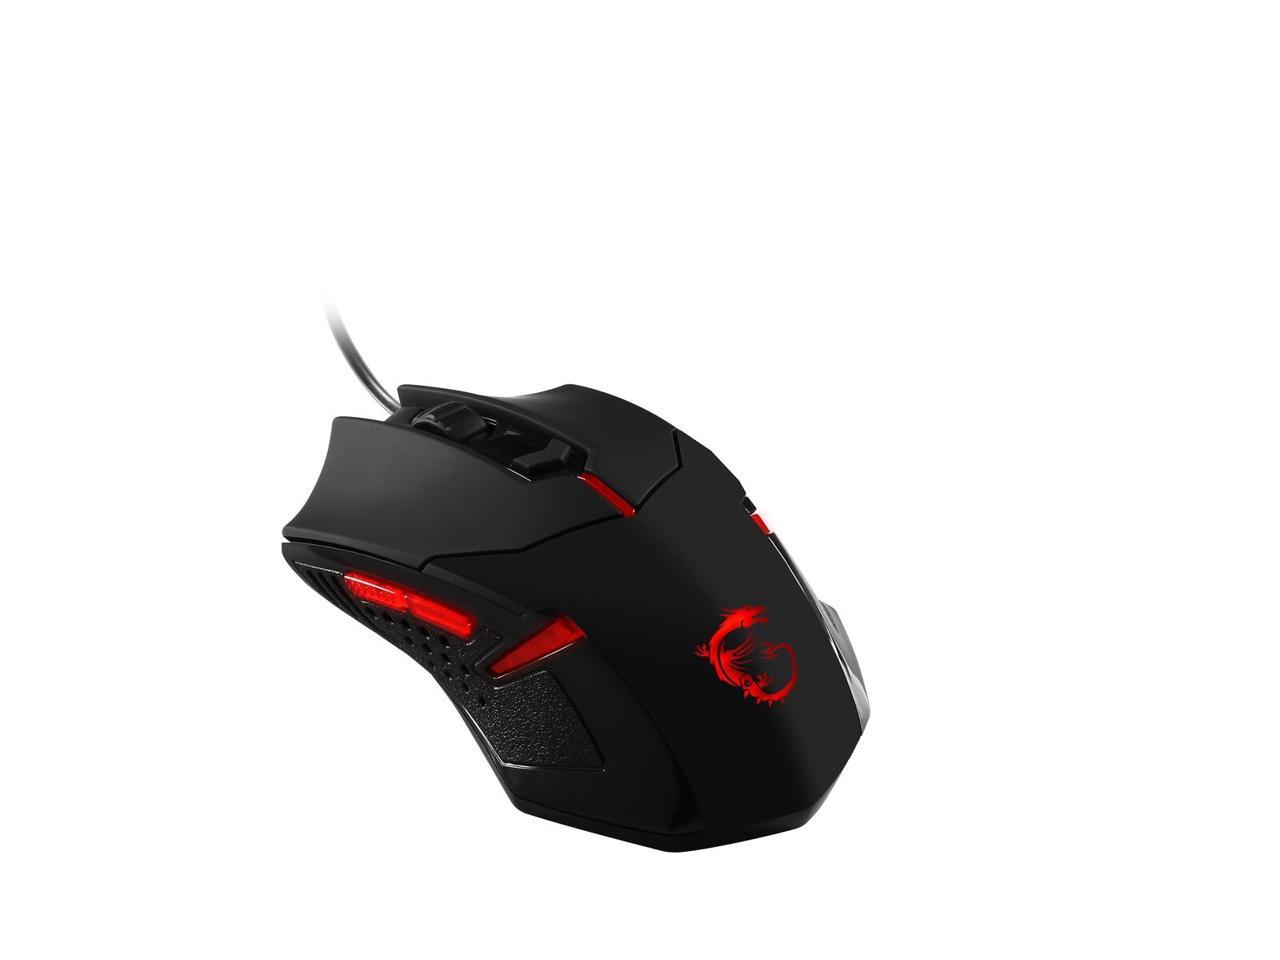 msi interceptor ds b1 gaming mouse review